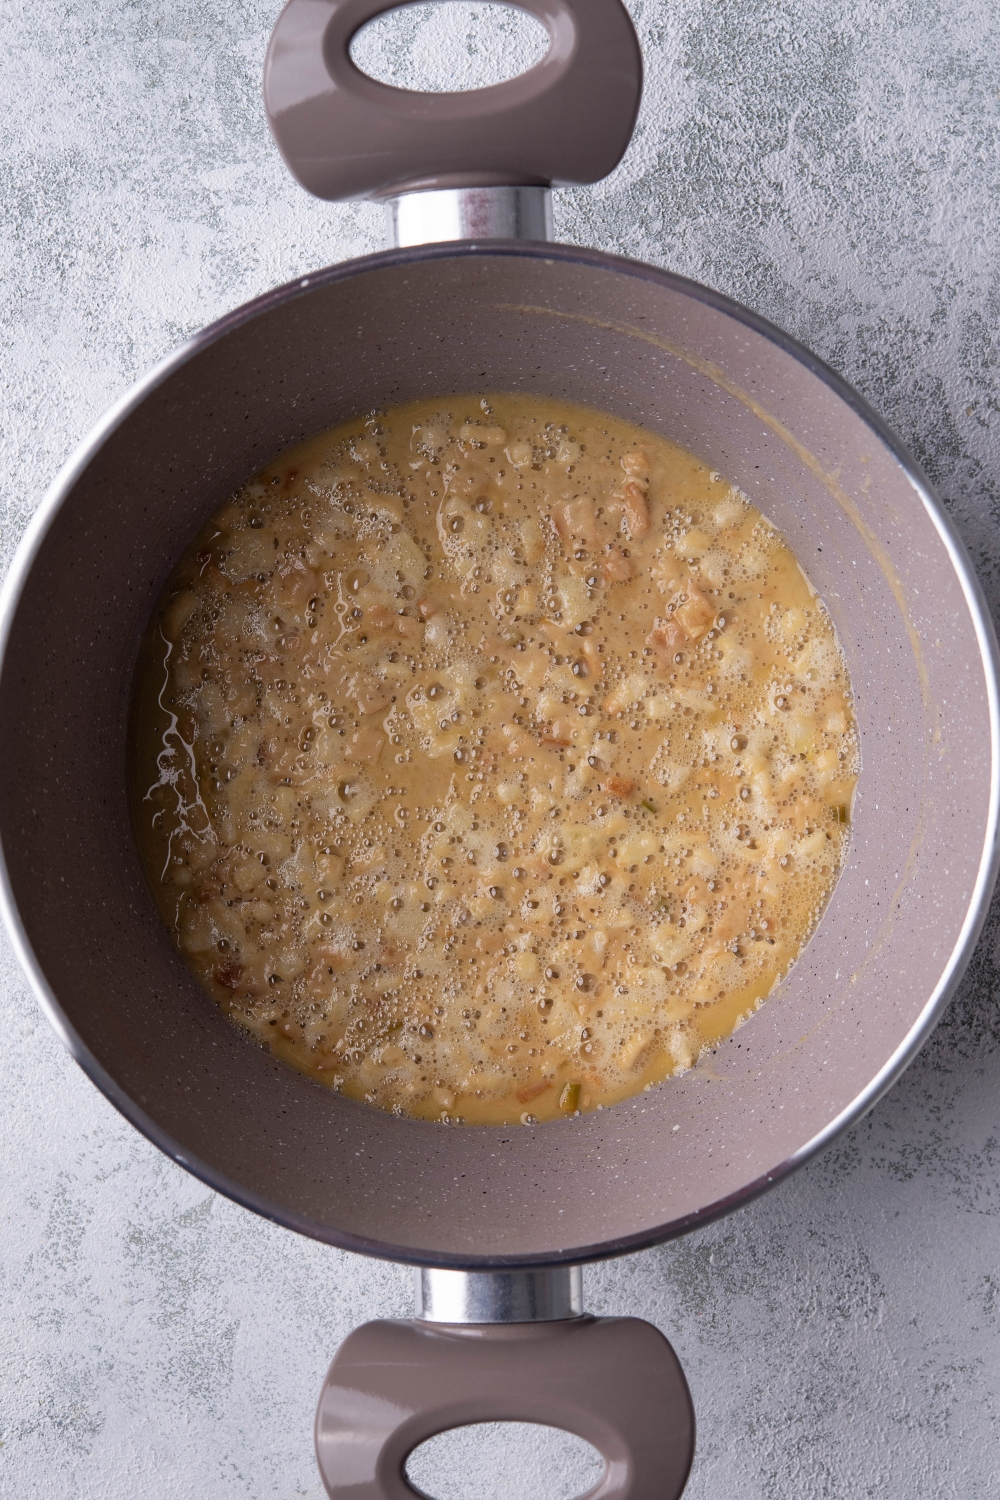 A deep pot with cooked onions in butter. Flour has been added to create a light tan color.